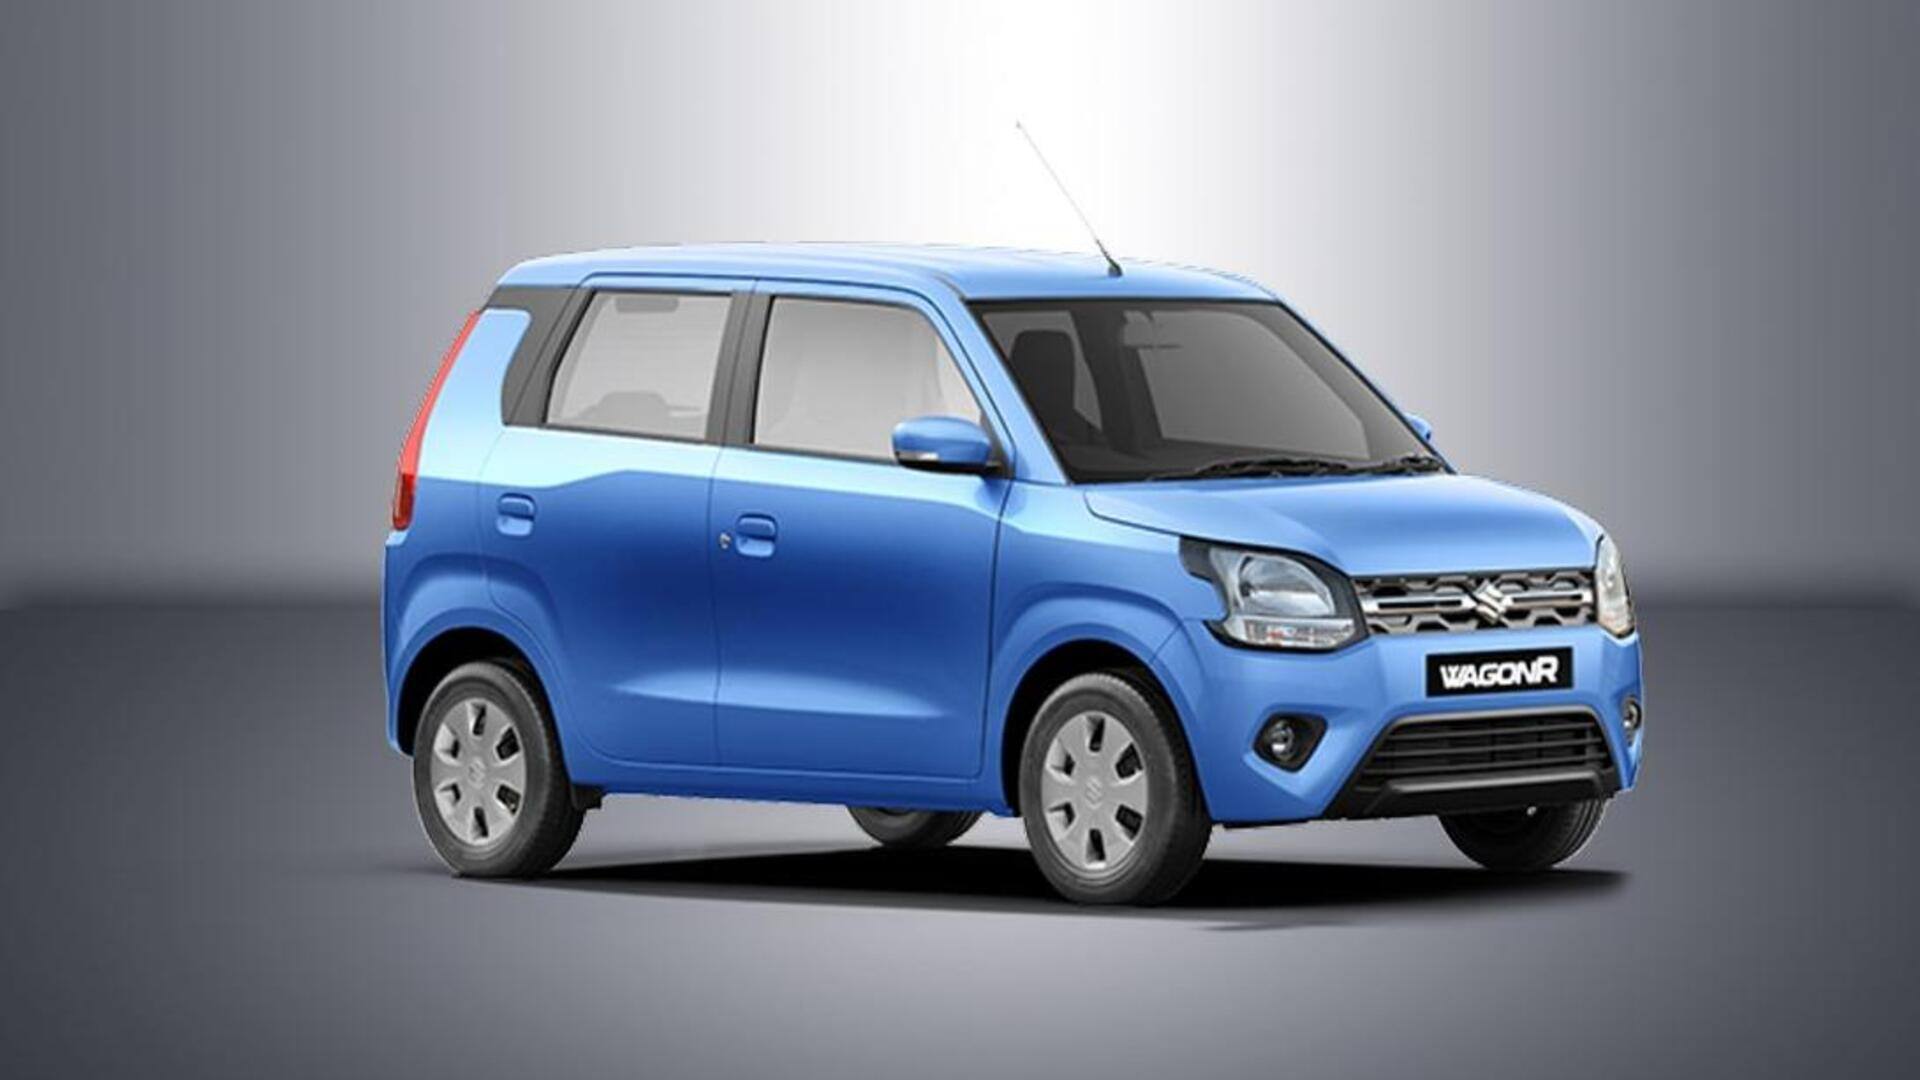 Maruti Suzuki offering exciting discounts on WagonR this September